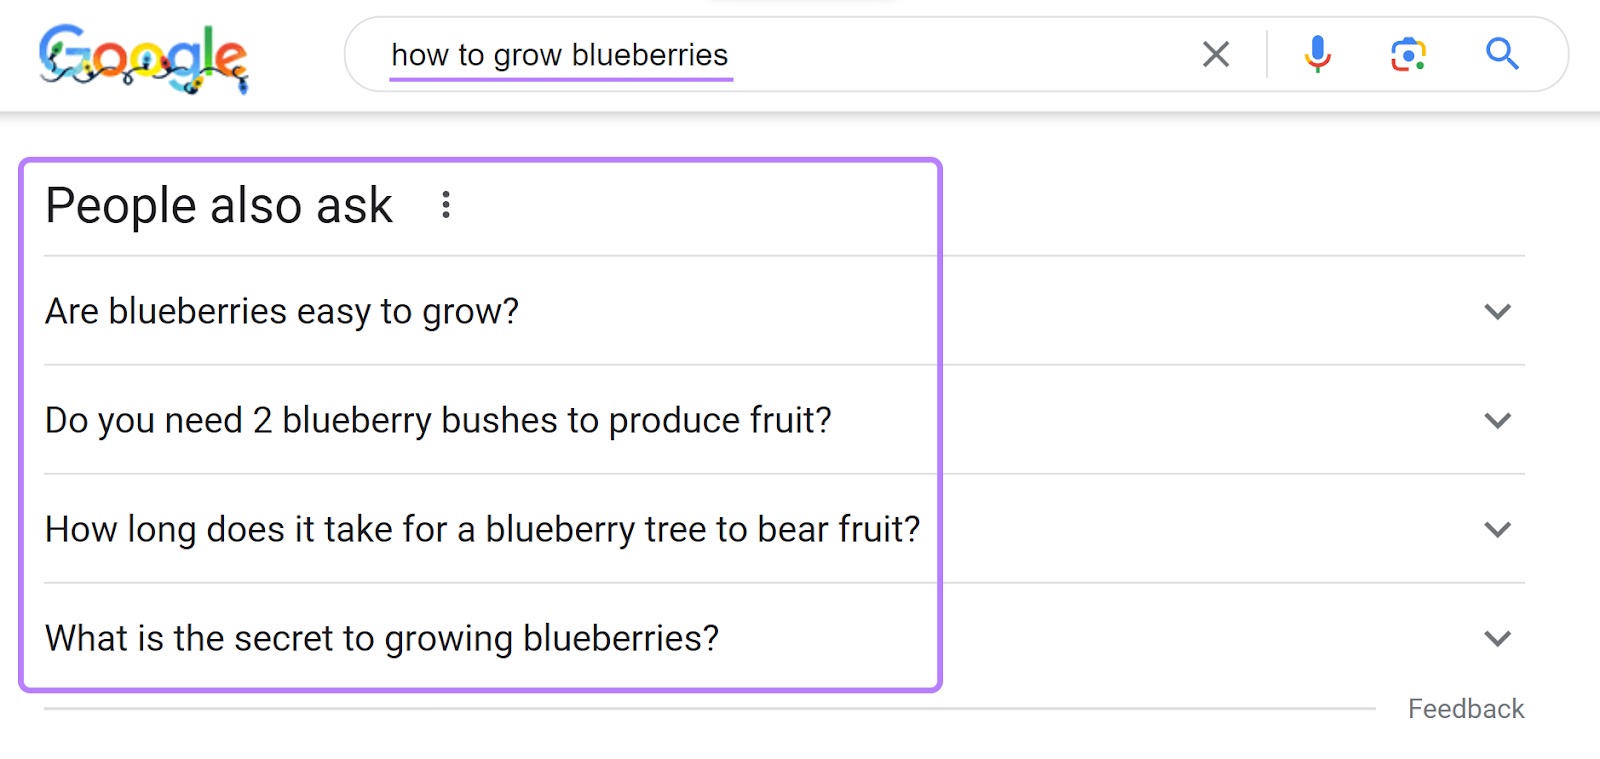 "People besides  ask" diagnostic   connected  Google SERP for "how to turn  blueberries" query